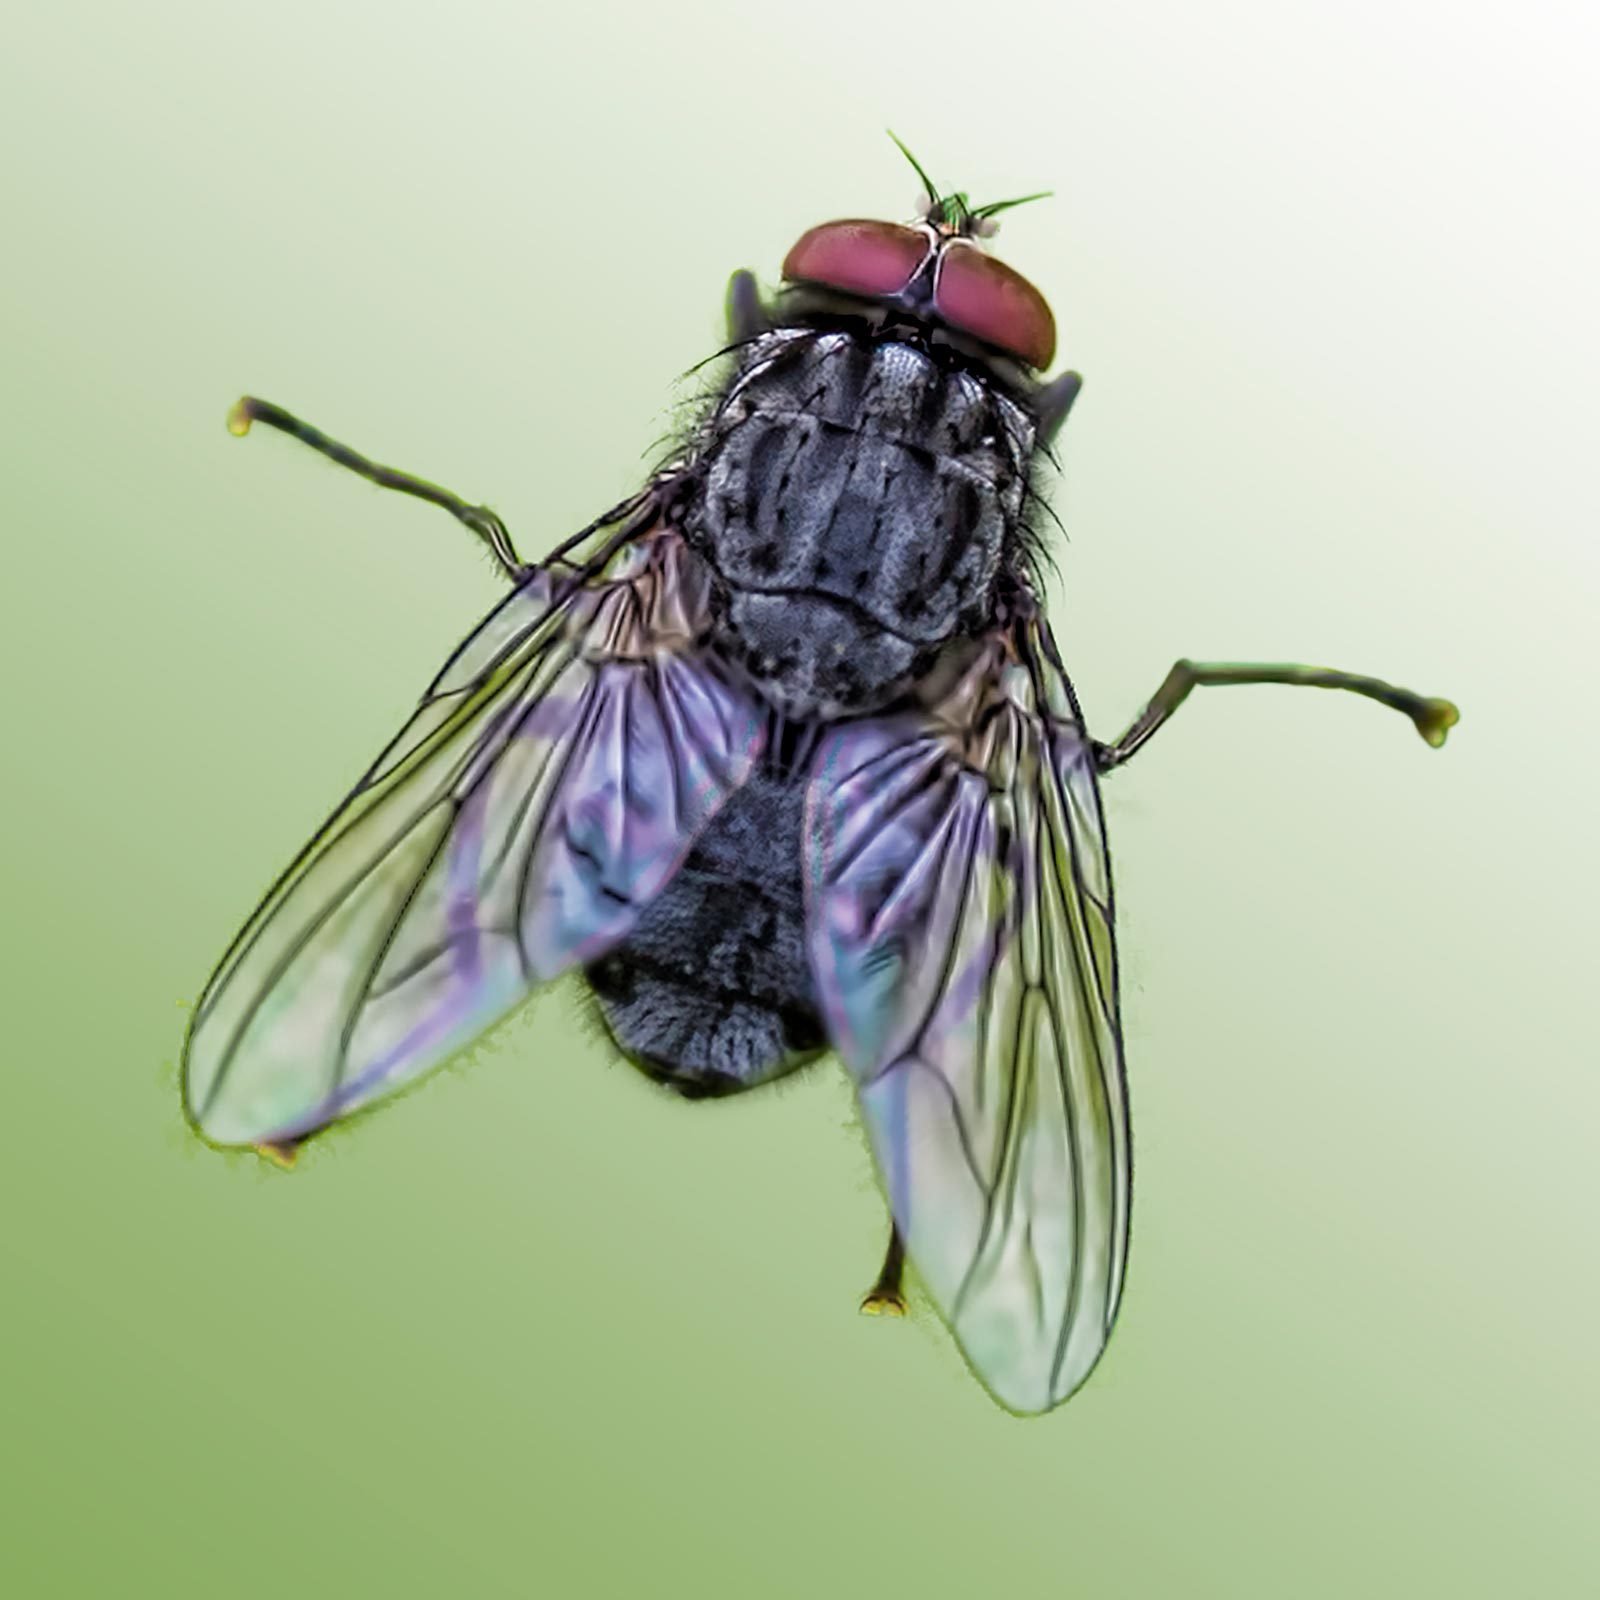 The 10 Most Common Types of Flies in the U.S.